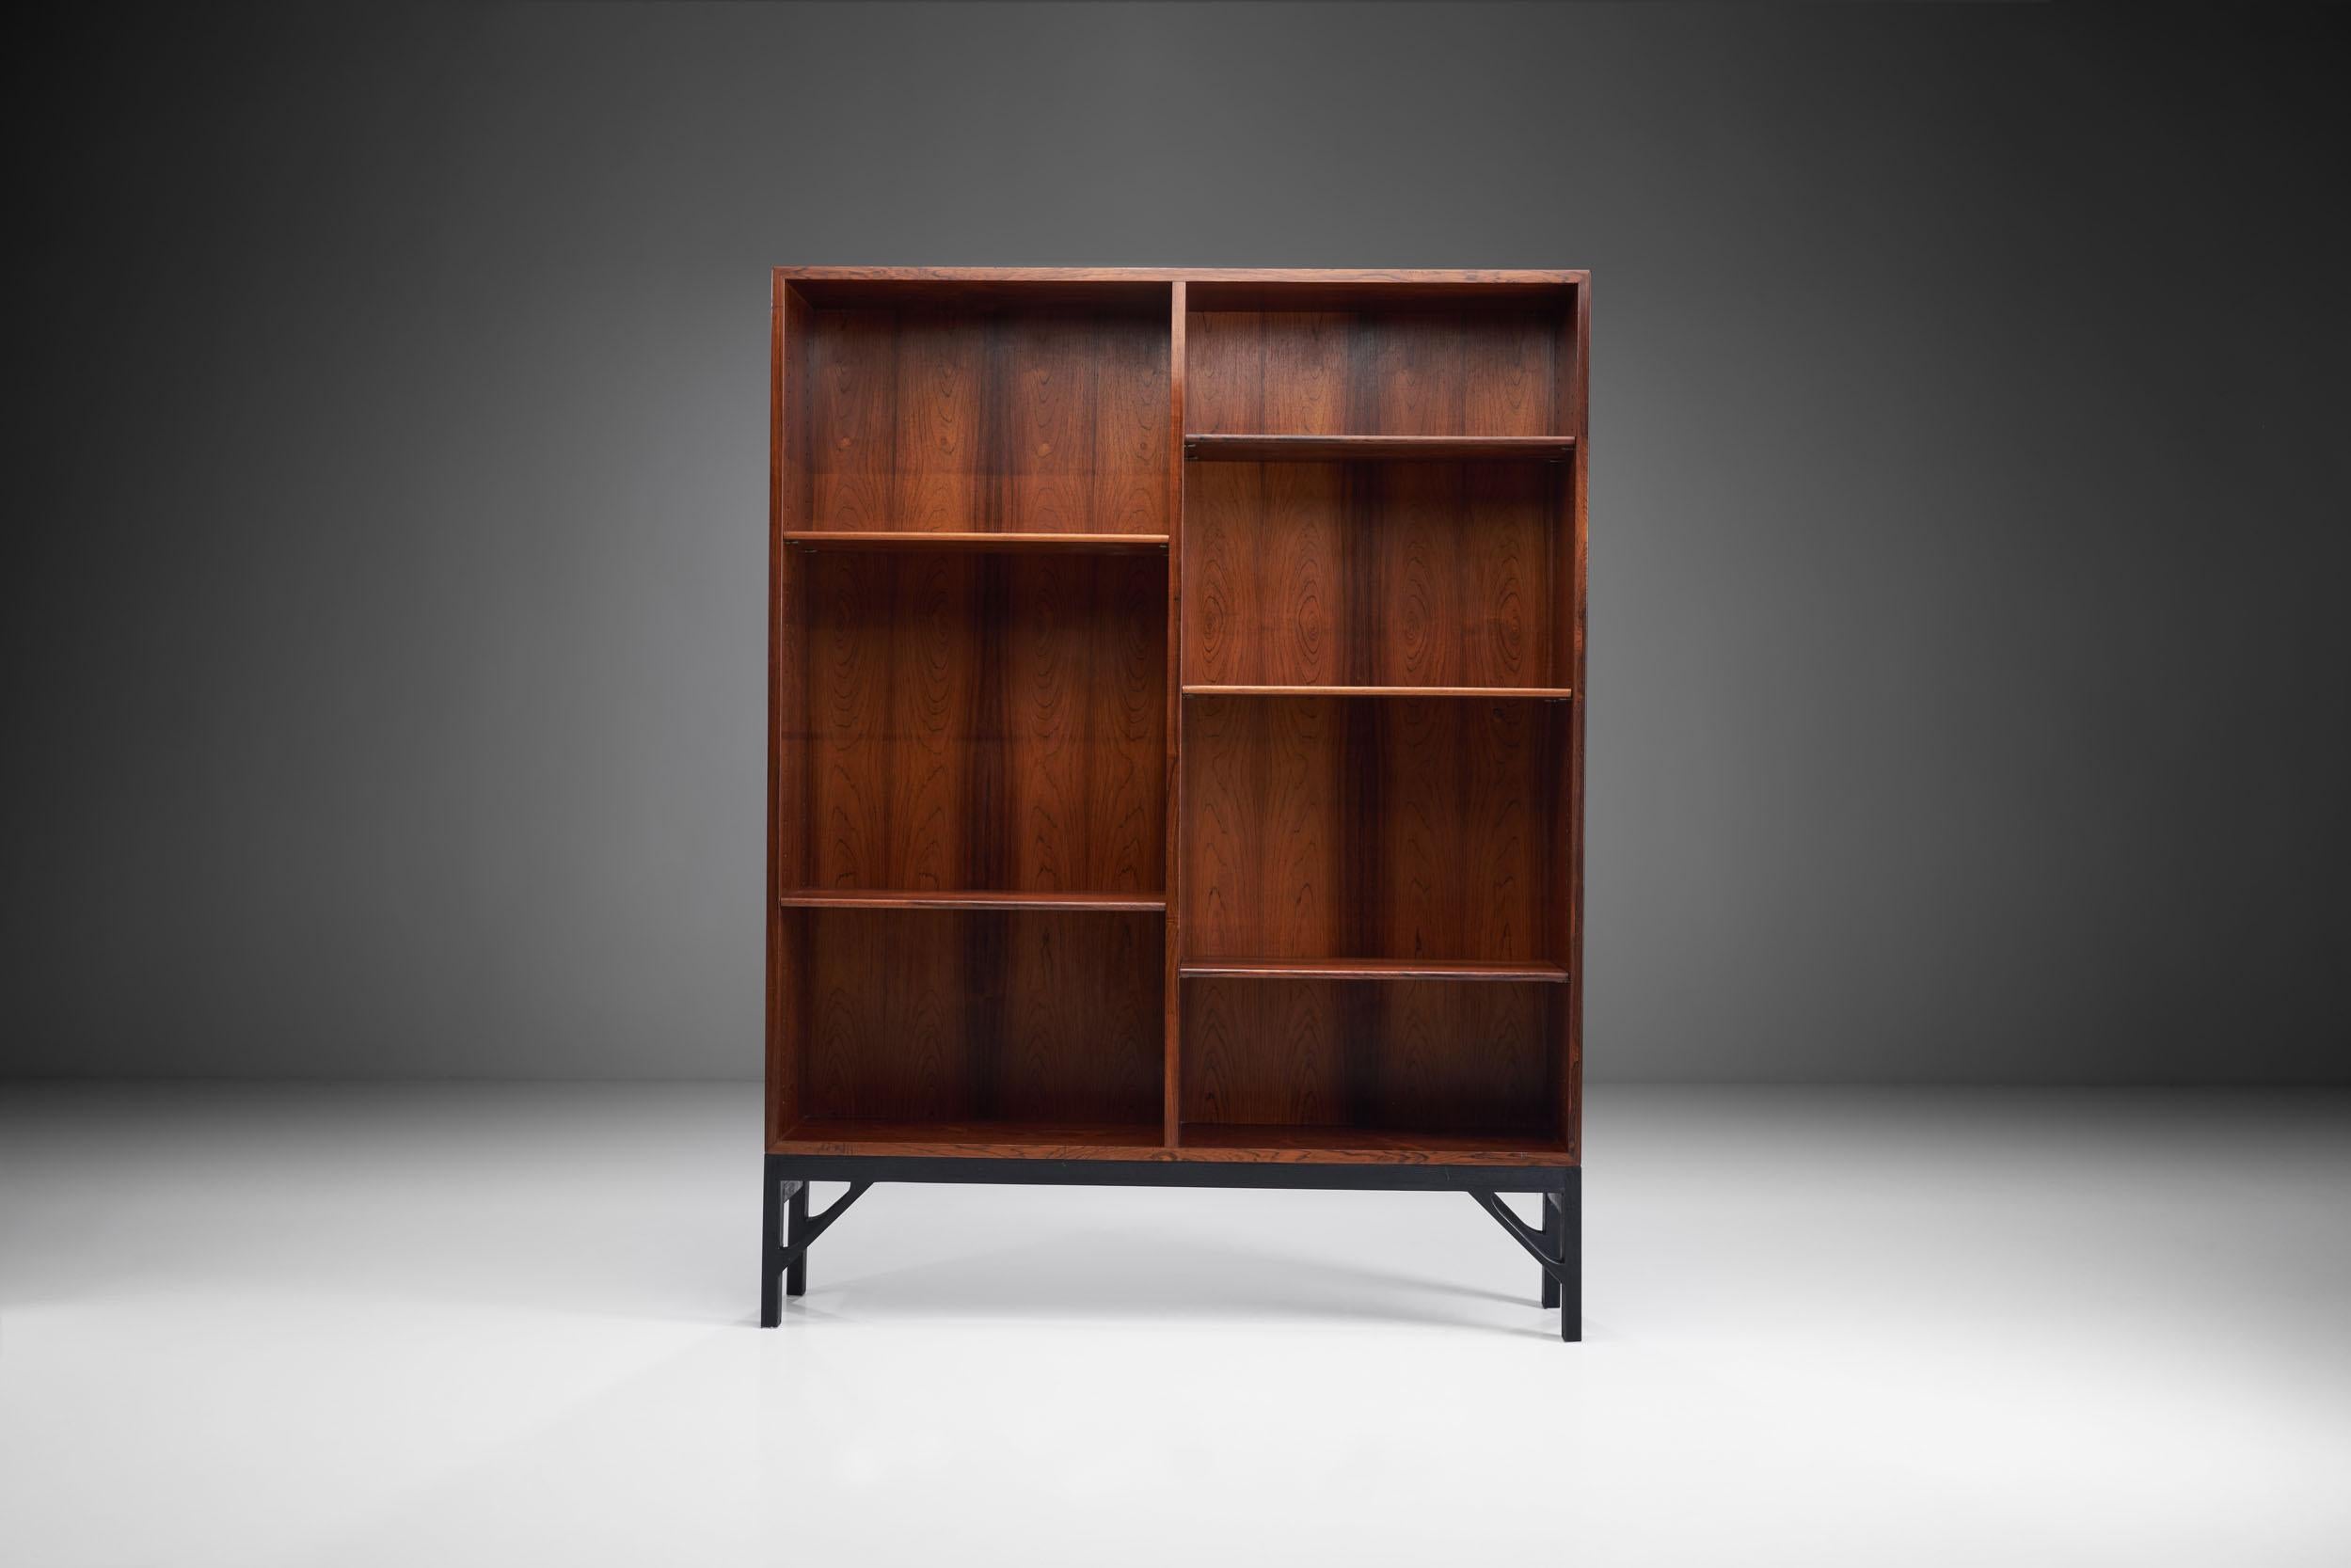 Wood Two Bookcases by Børge Mogensen for C. M. Madsen, Denmark, 1950s For Sale